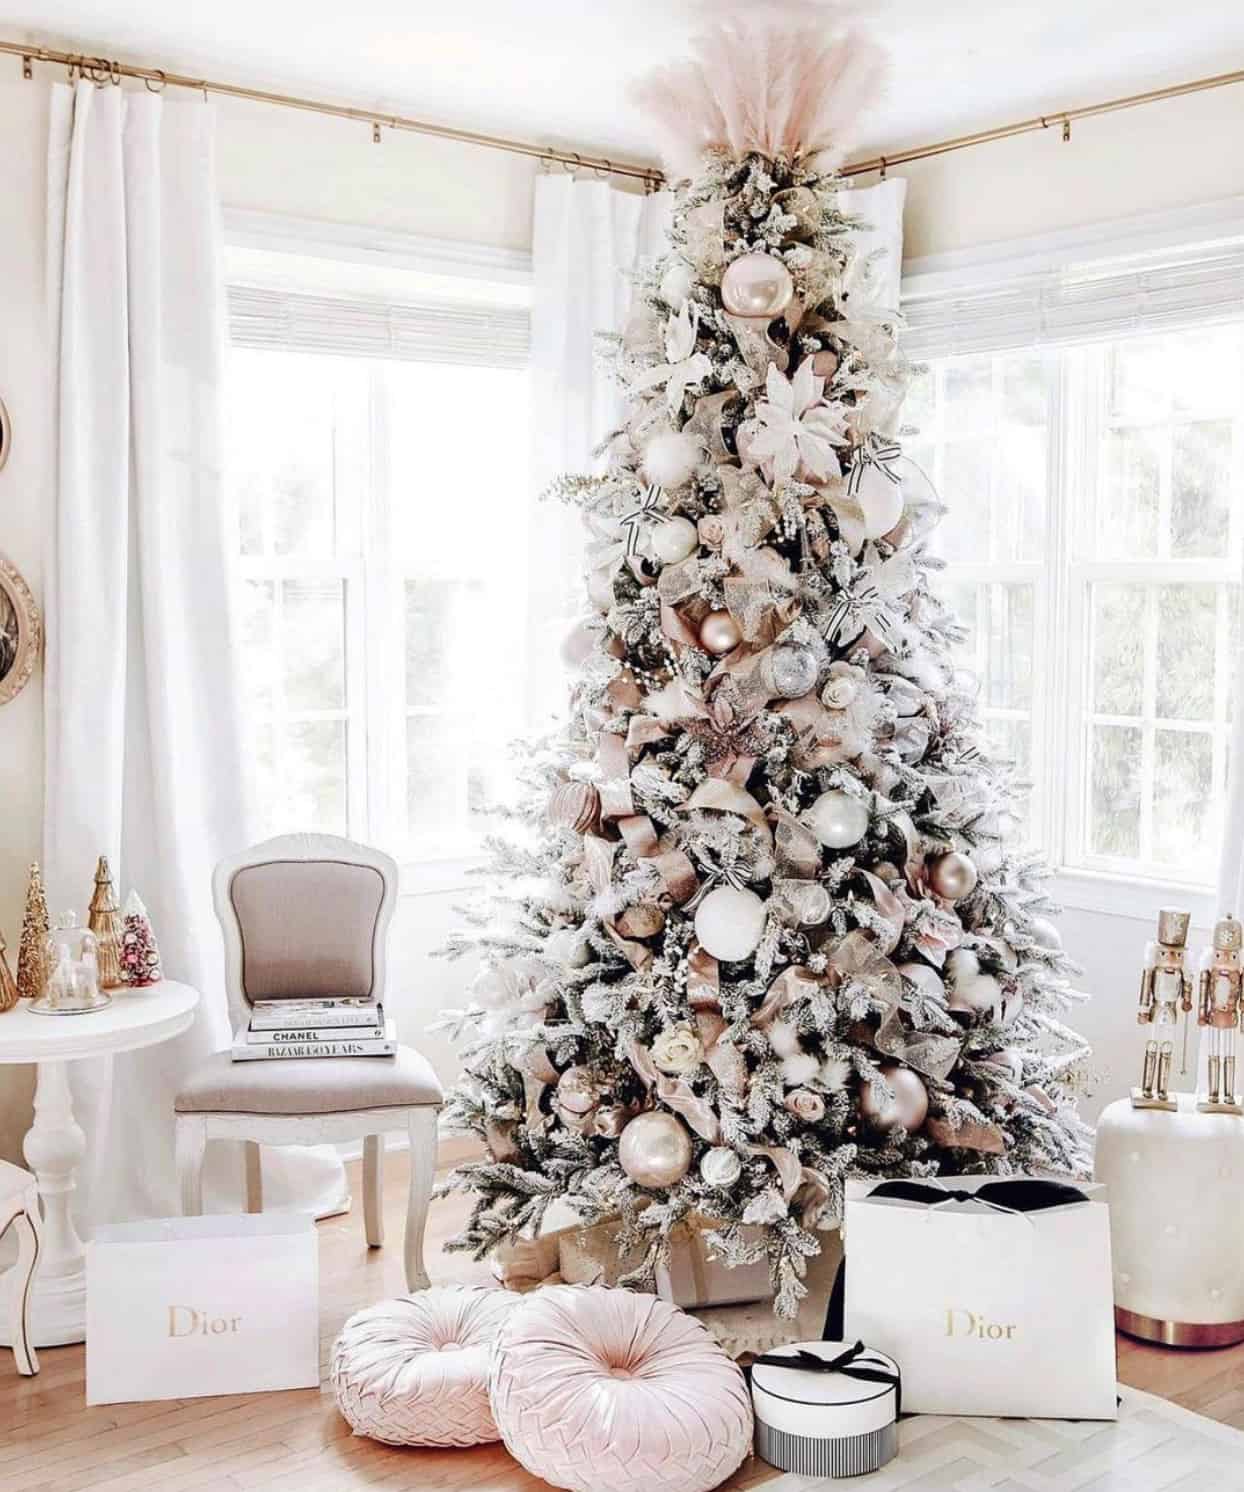 Elegant Holiday Decorating Ideas for the Dining Room